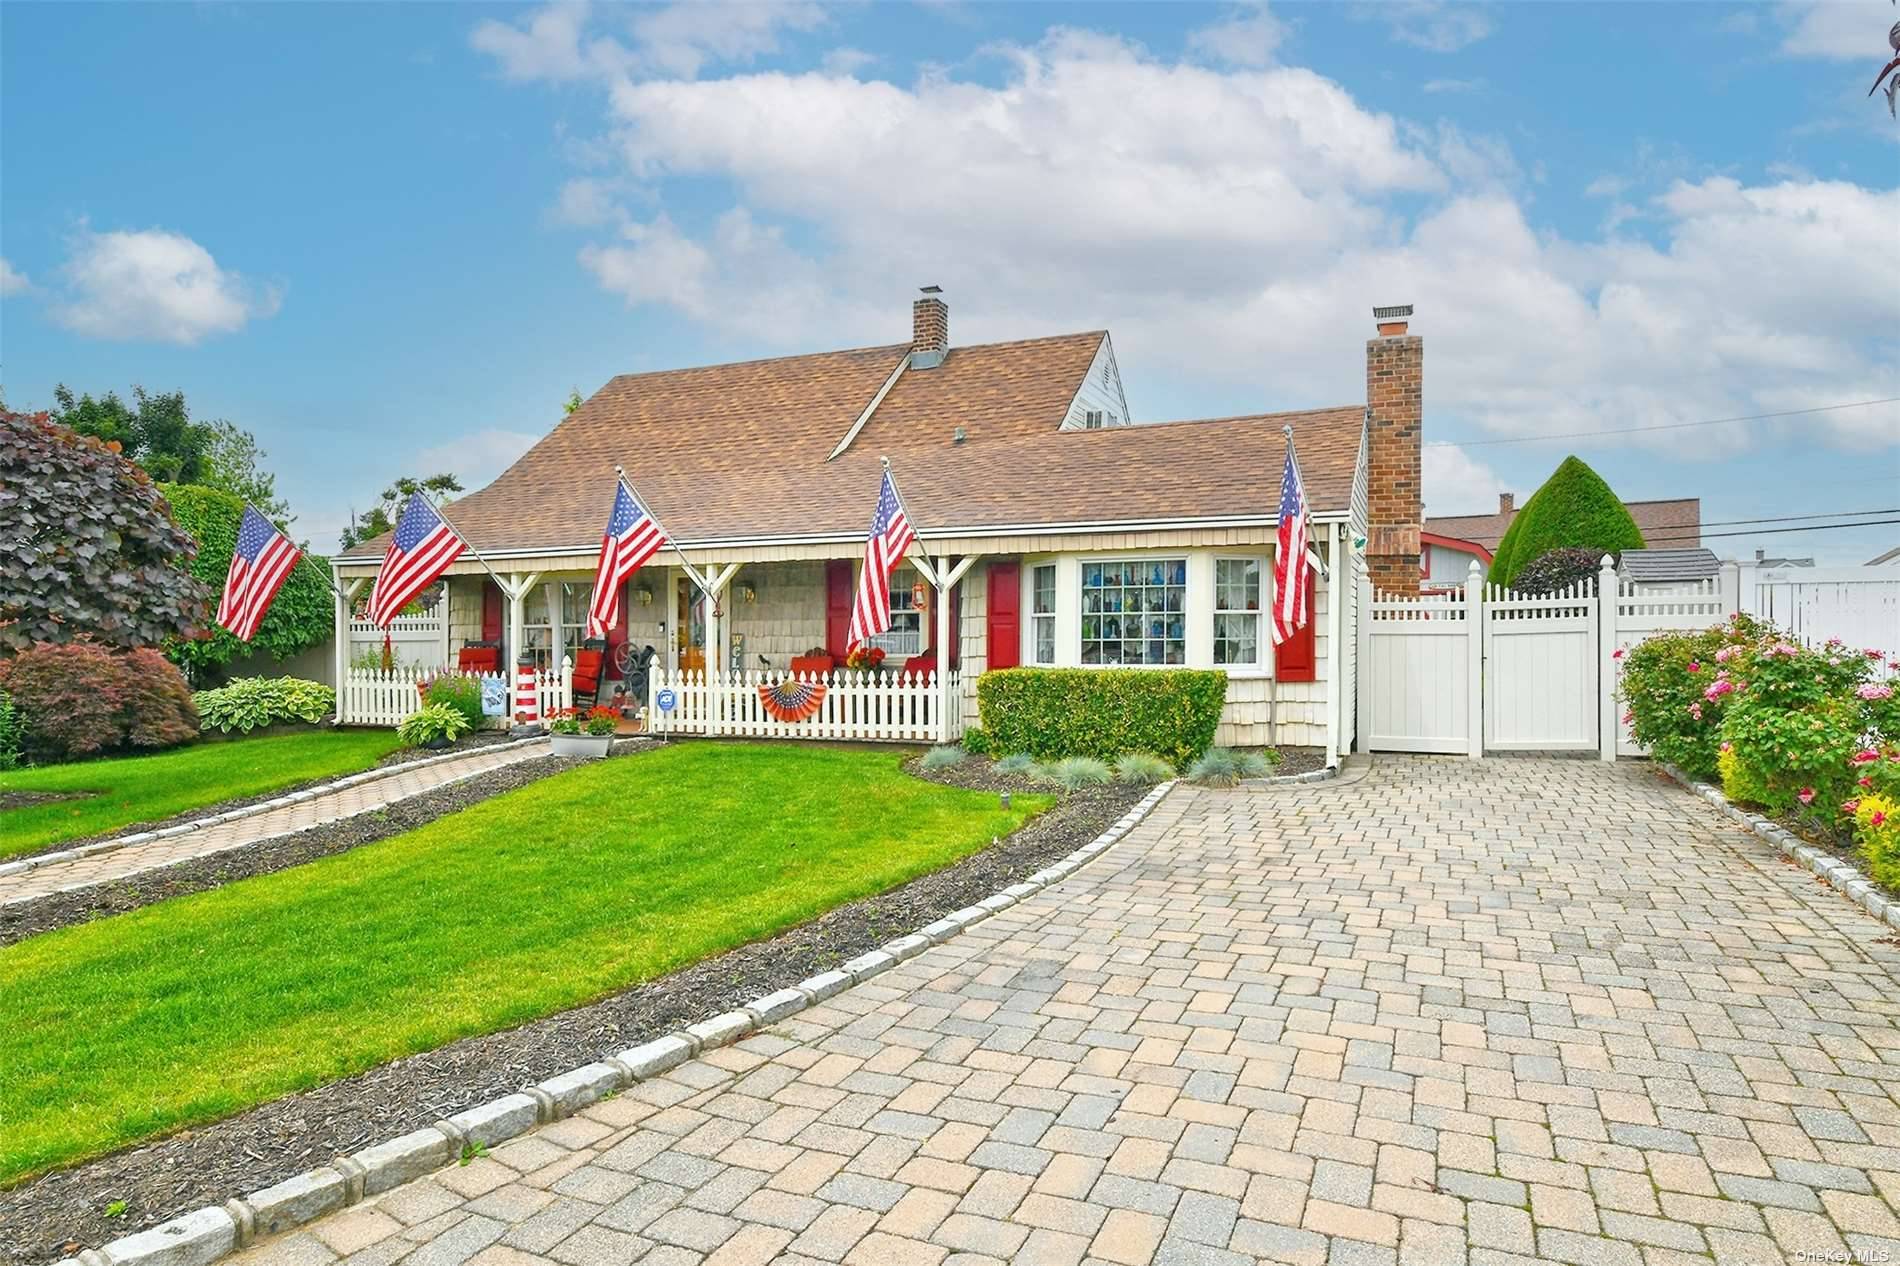 This Levittown home is truly one of a kind, boasting 4 bedrooms and 1.